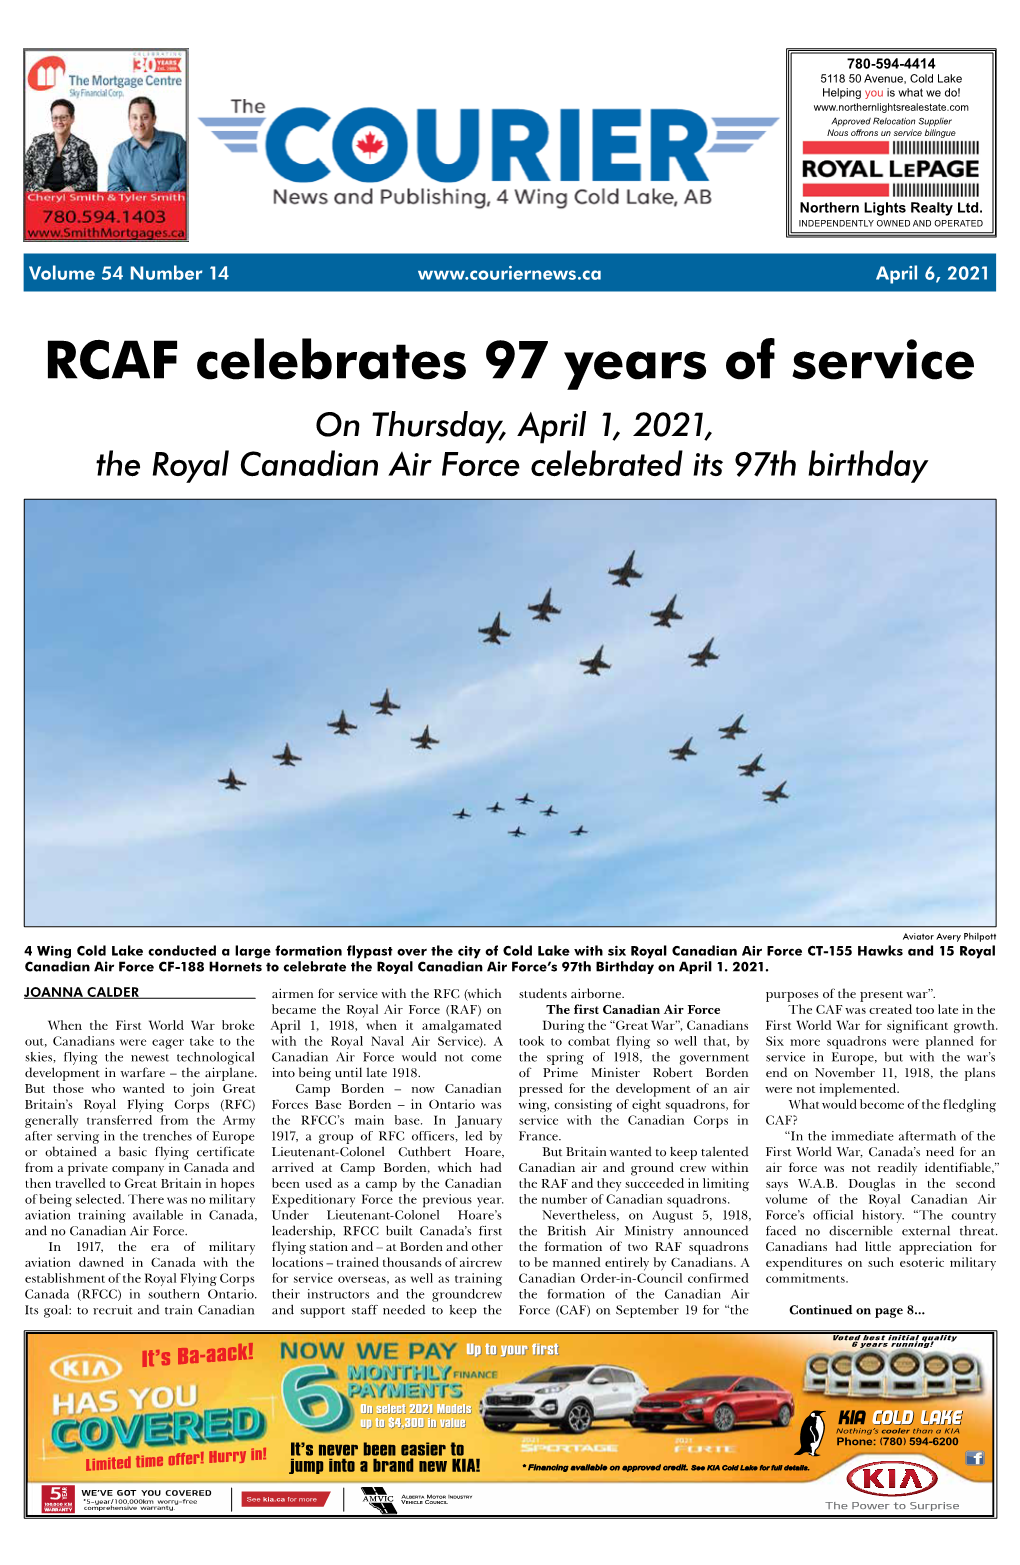 RCAF Celebrates 97 Years of Service on Thursday, April 1, 2021, the Royal Canadian Air Force Celebrated Its 97Th Birthday